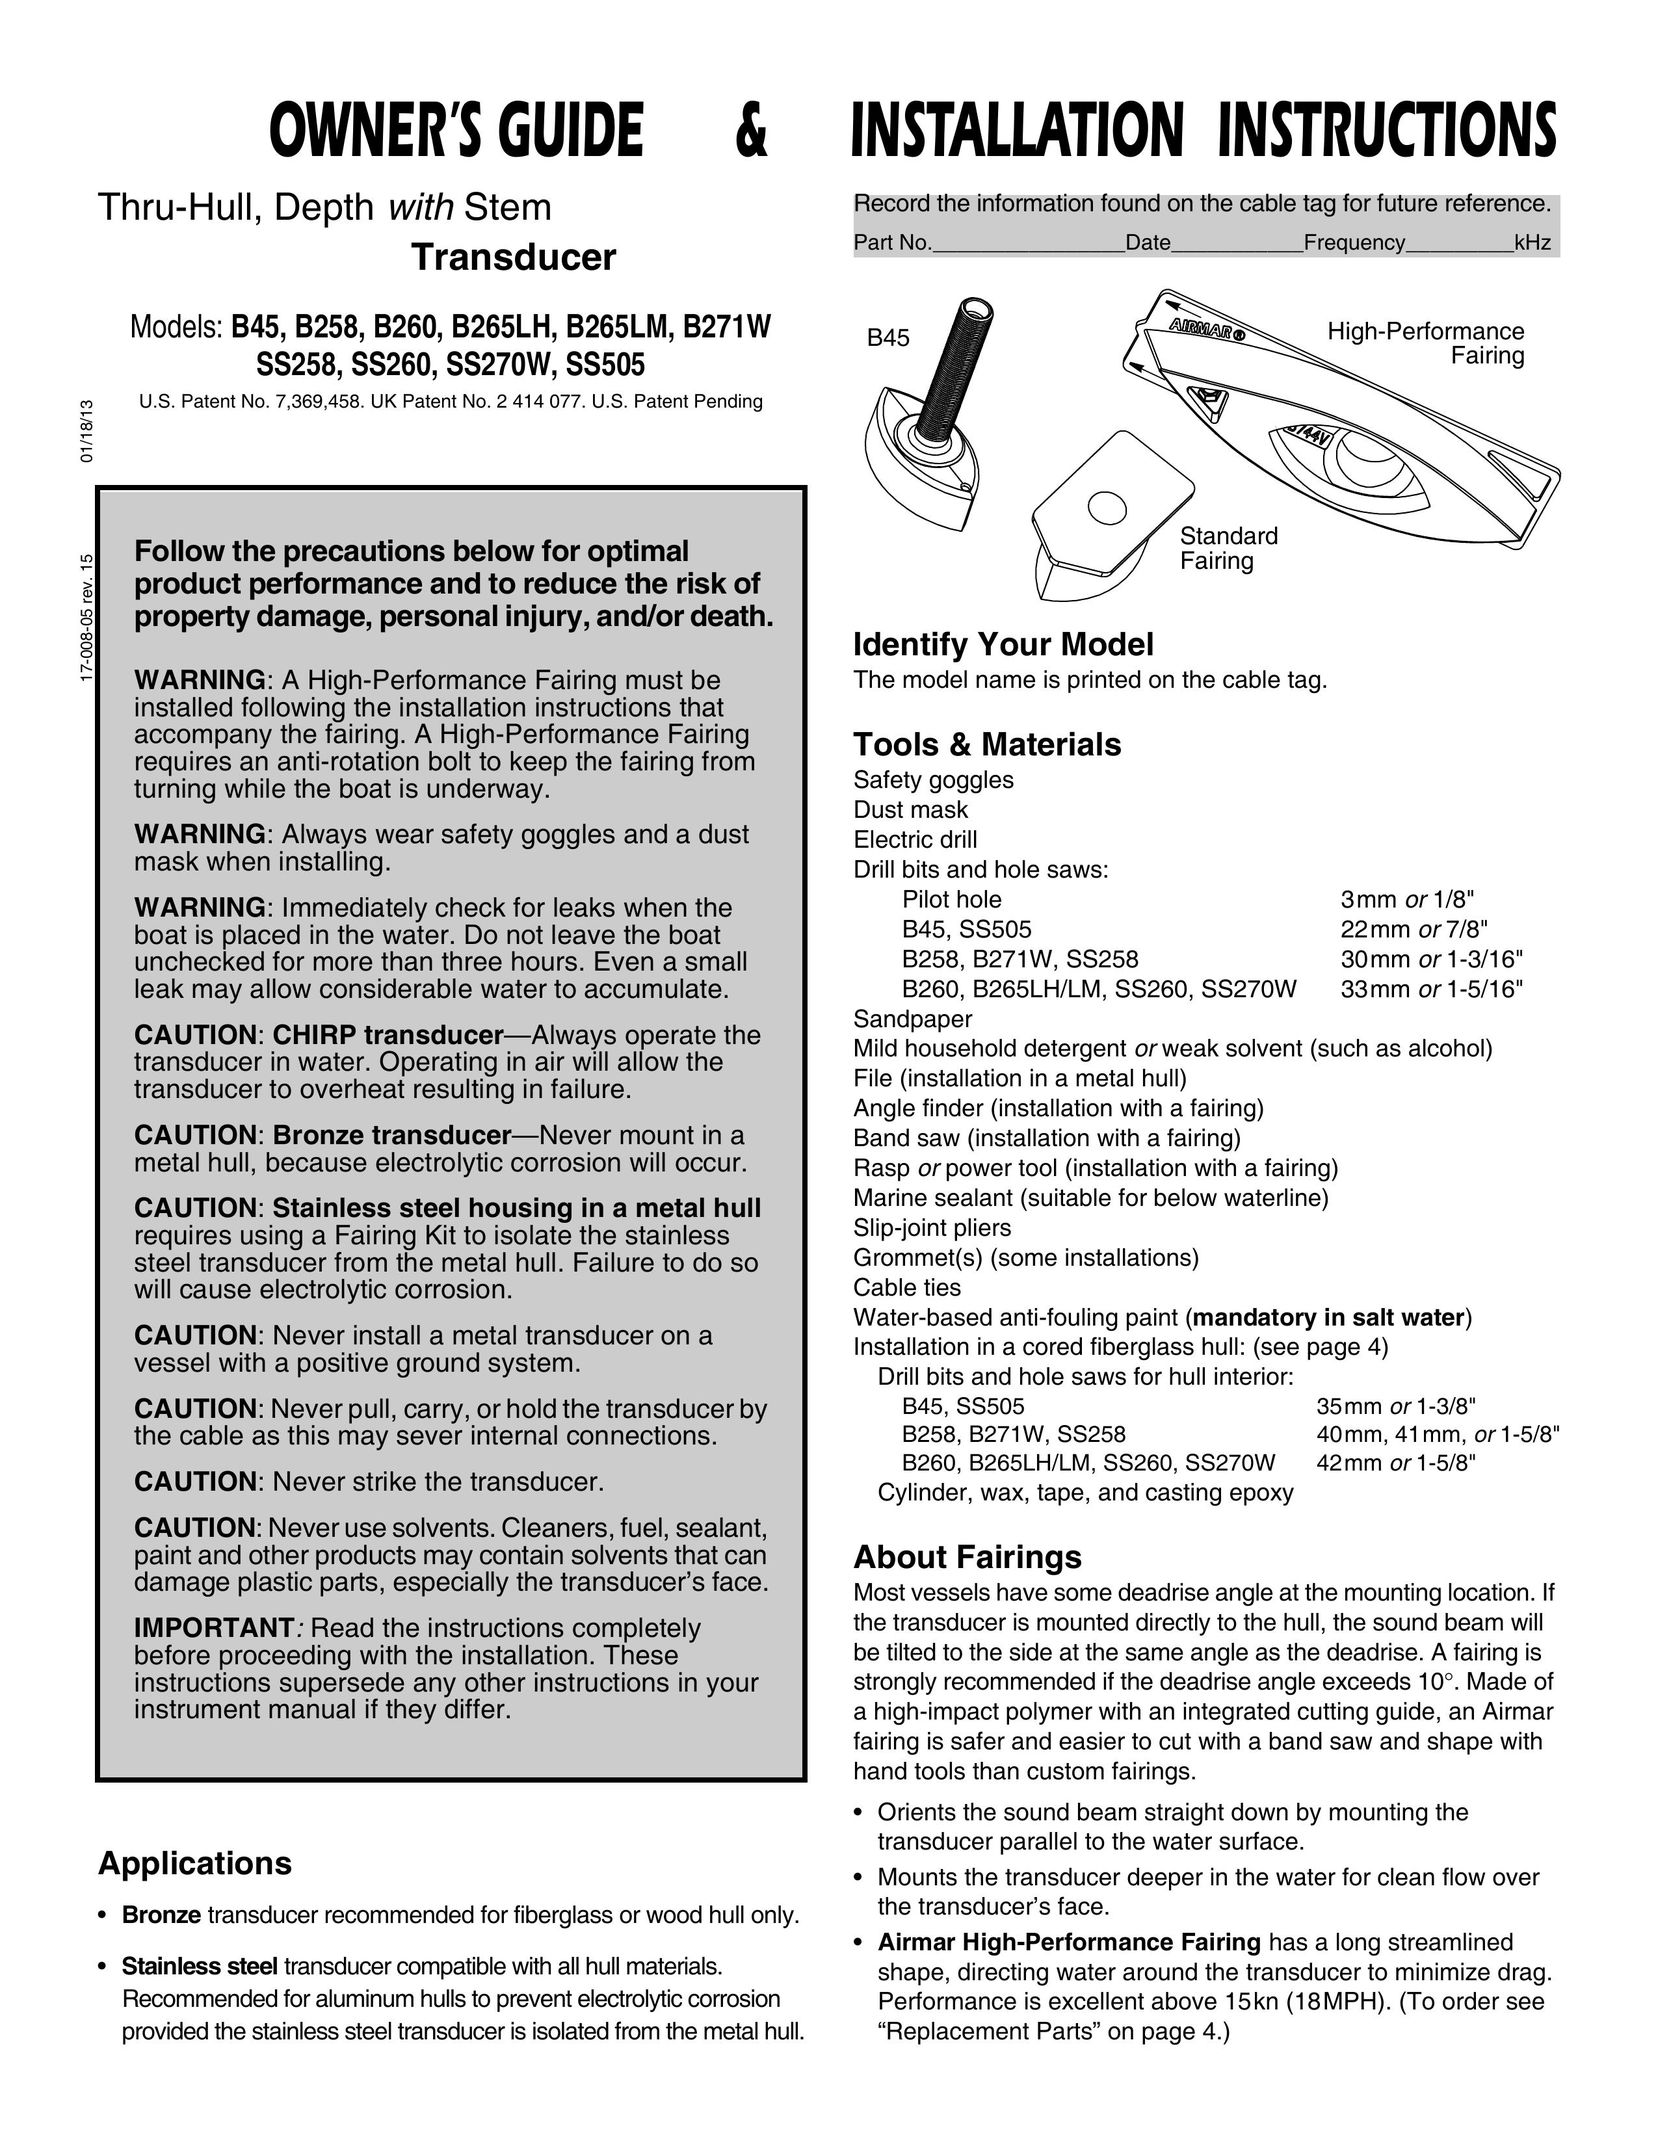 New Transducers B258 Network Router User Manual